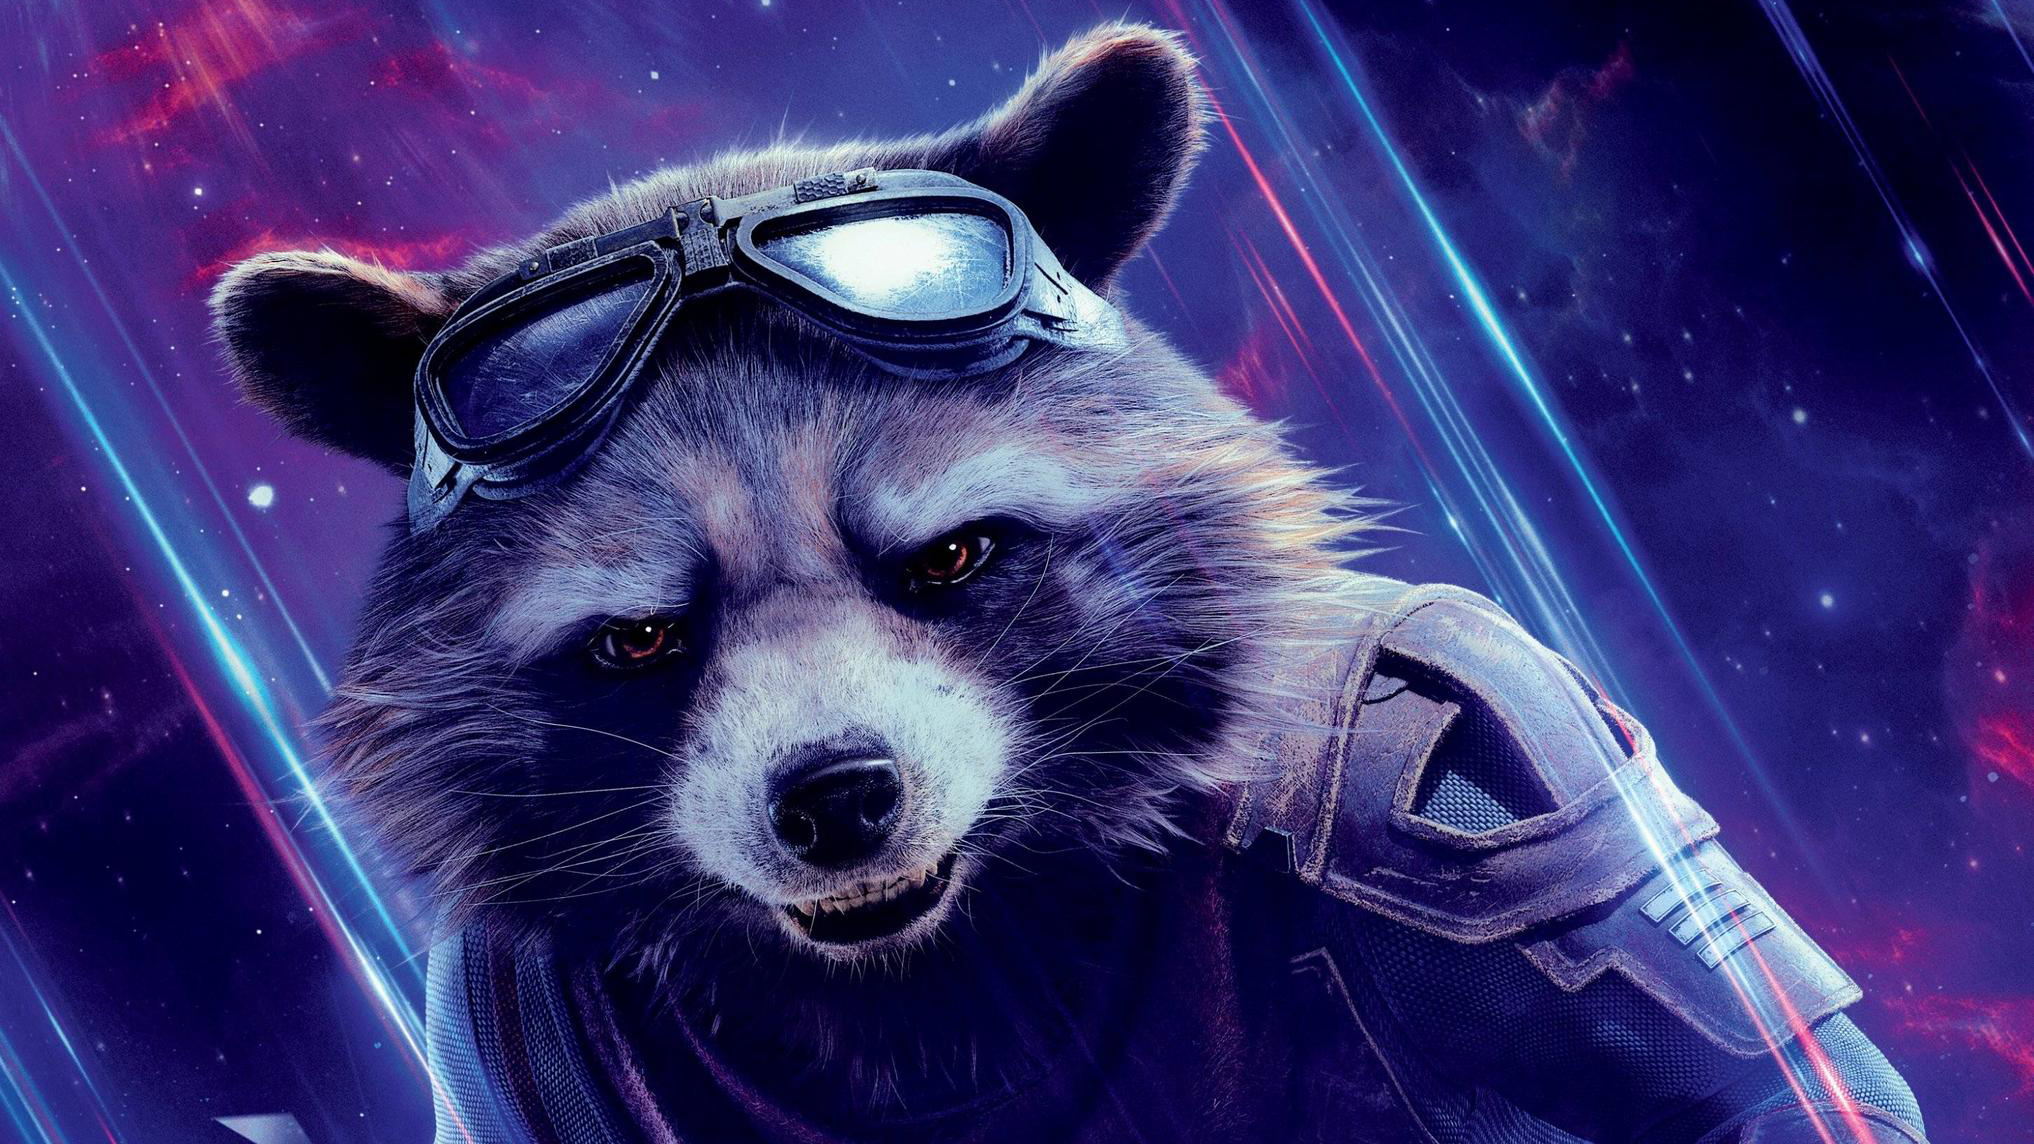 260+ Rocket Raccoon HD Wallpapers and Backgrounds